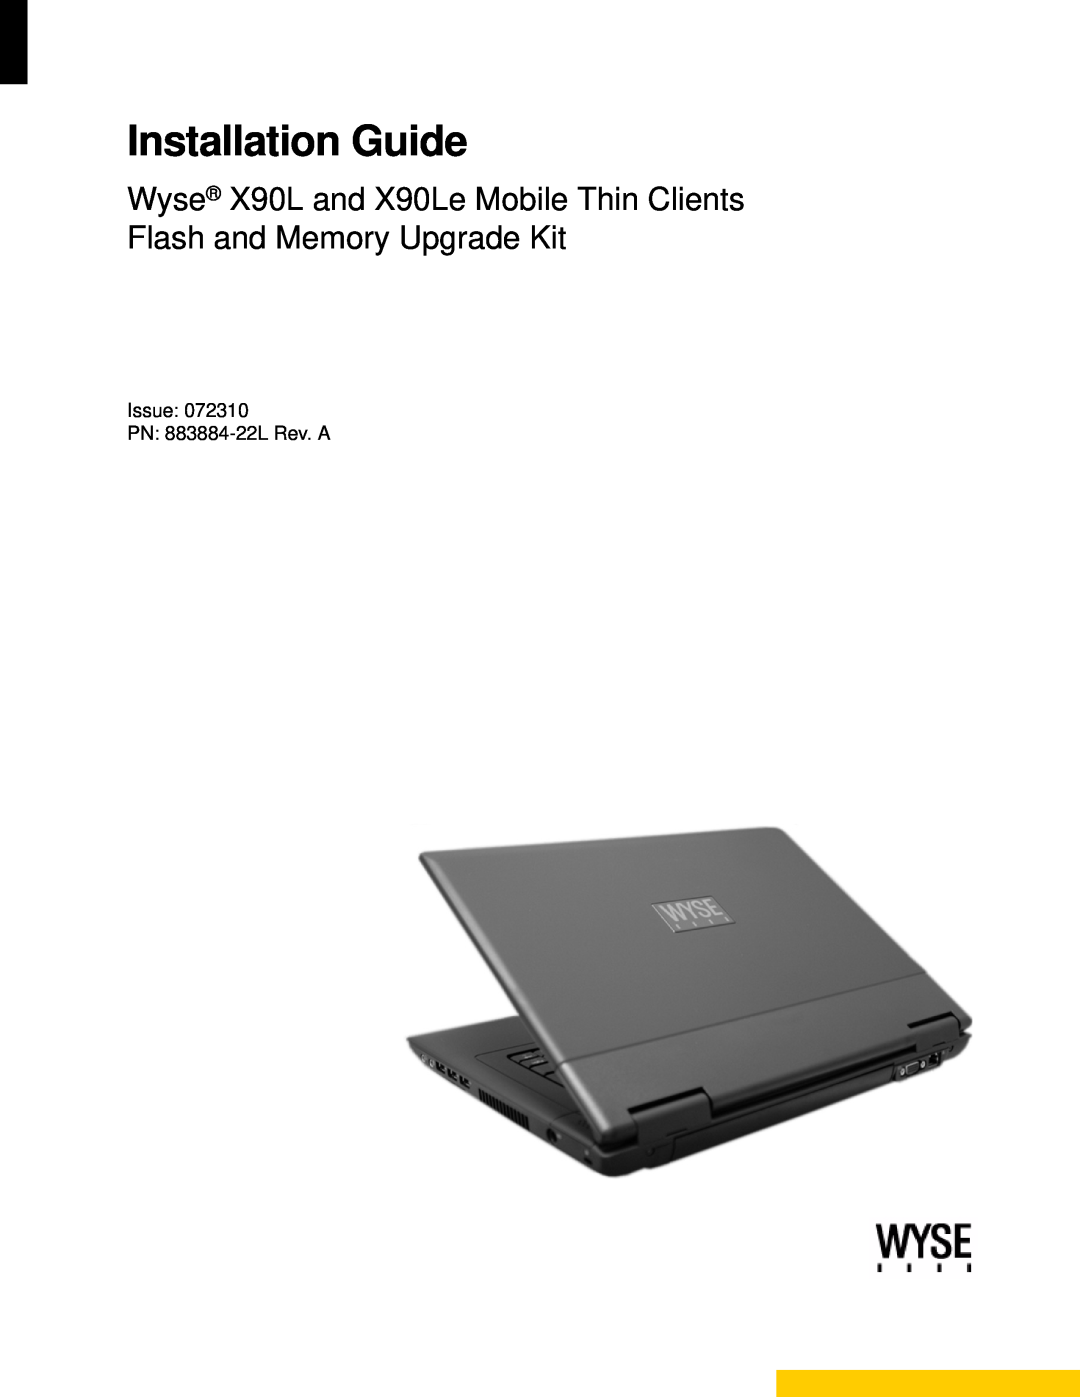 Wyse Technology X90LE manual Installation Guide, Wyse X90L and X90Le Mobile Thin Clients Flash and Memory Upgrade Kit 